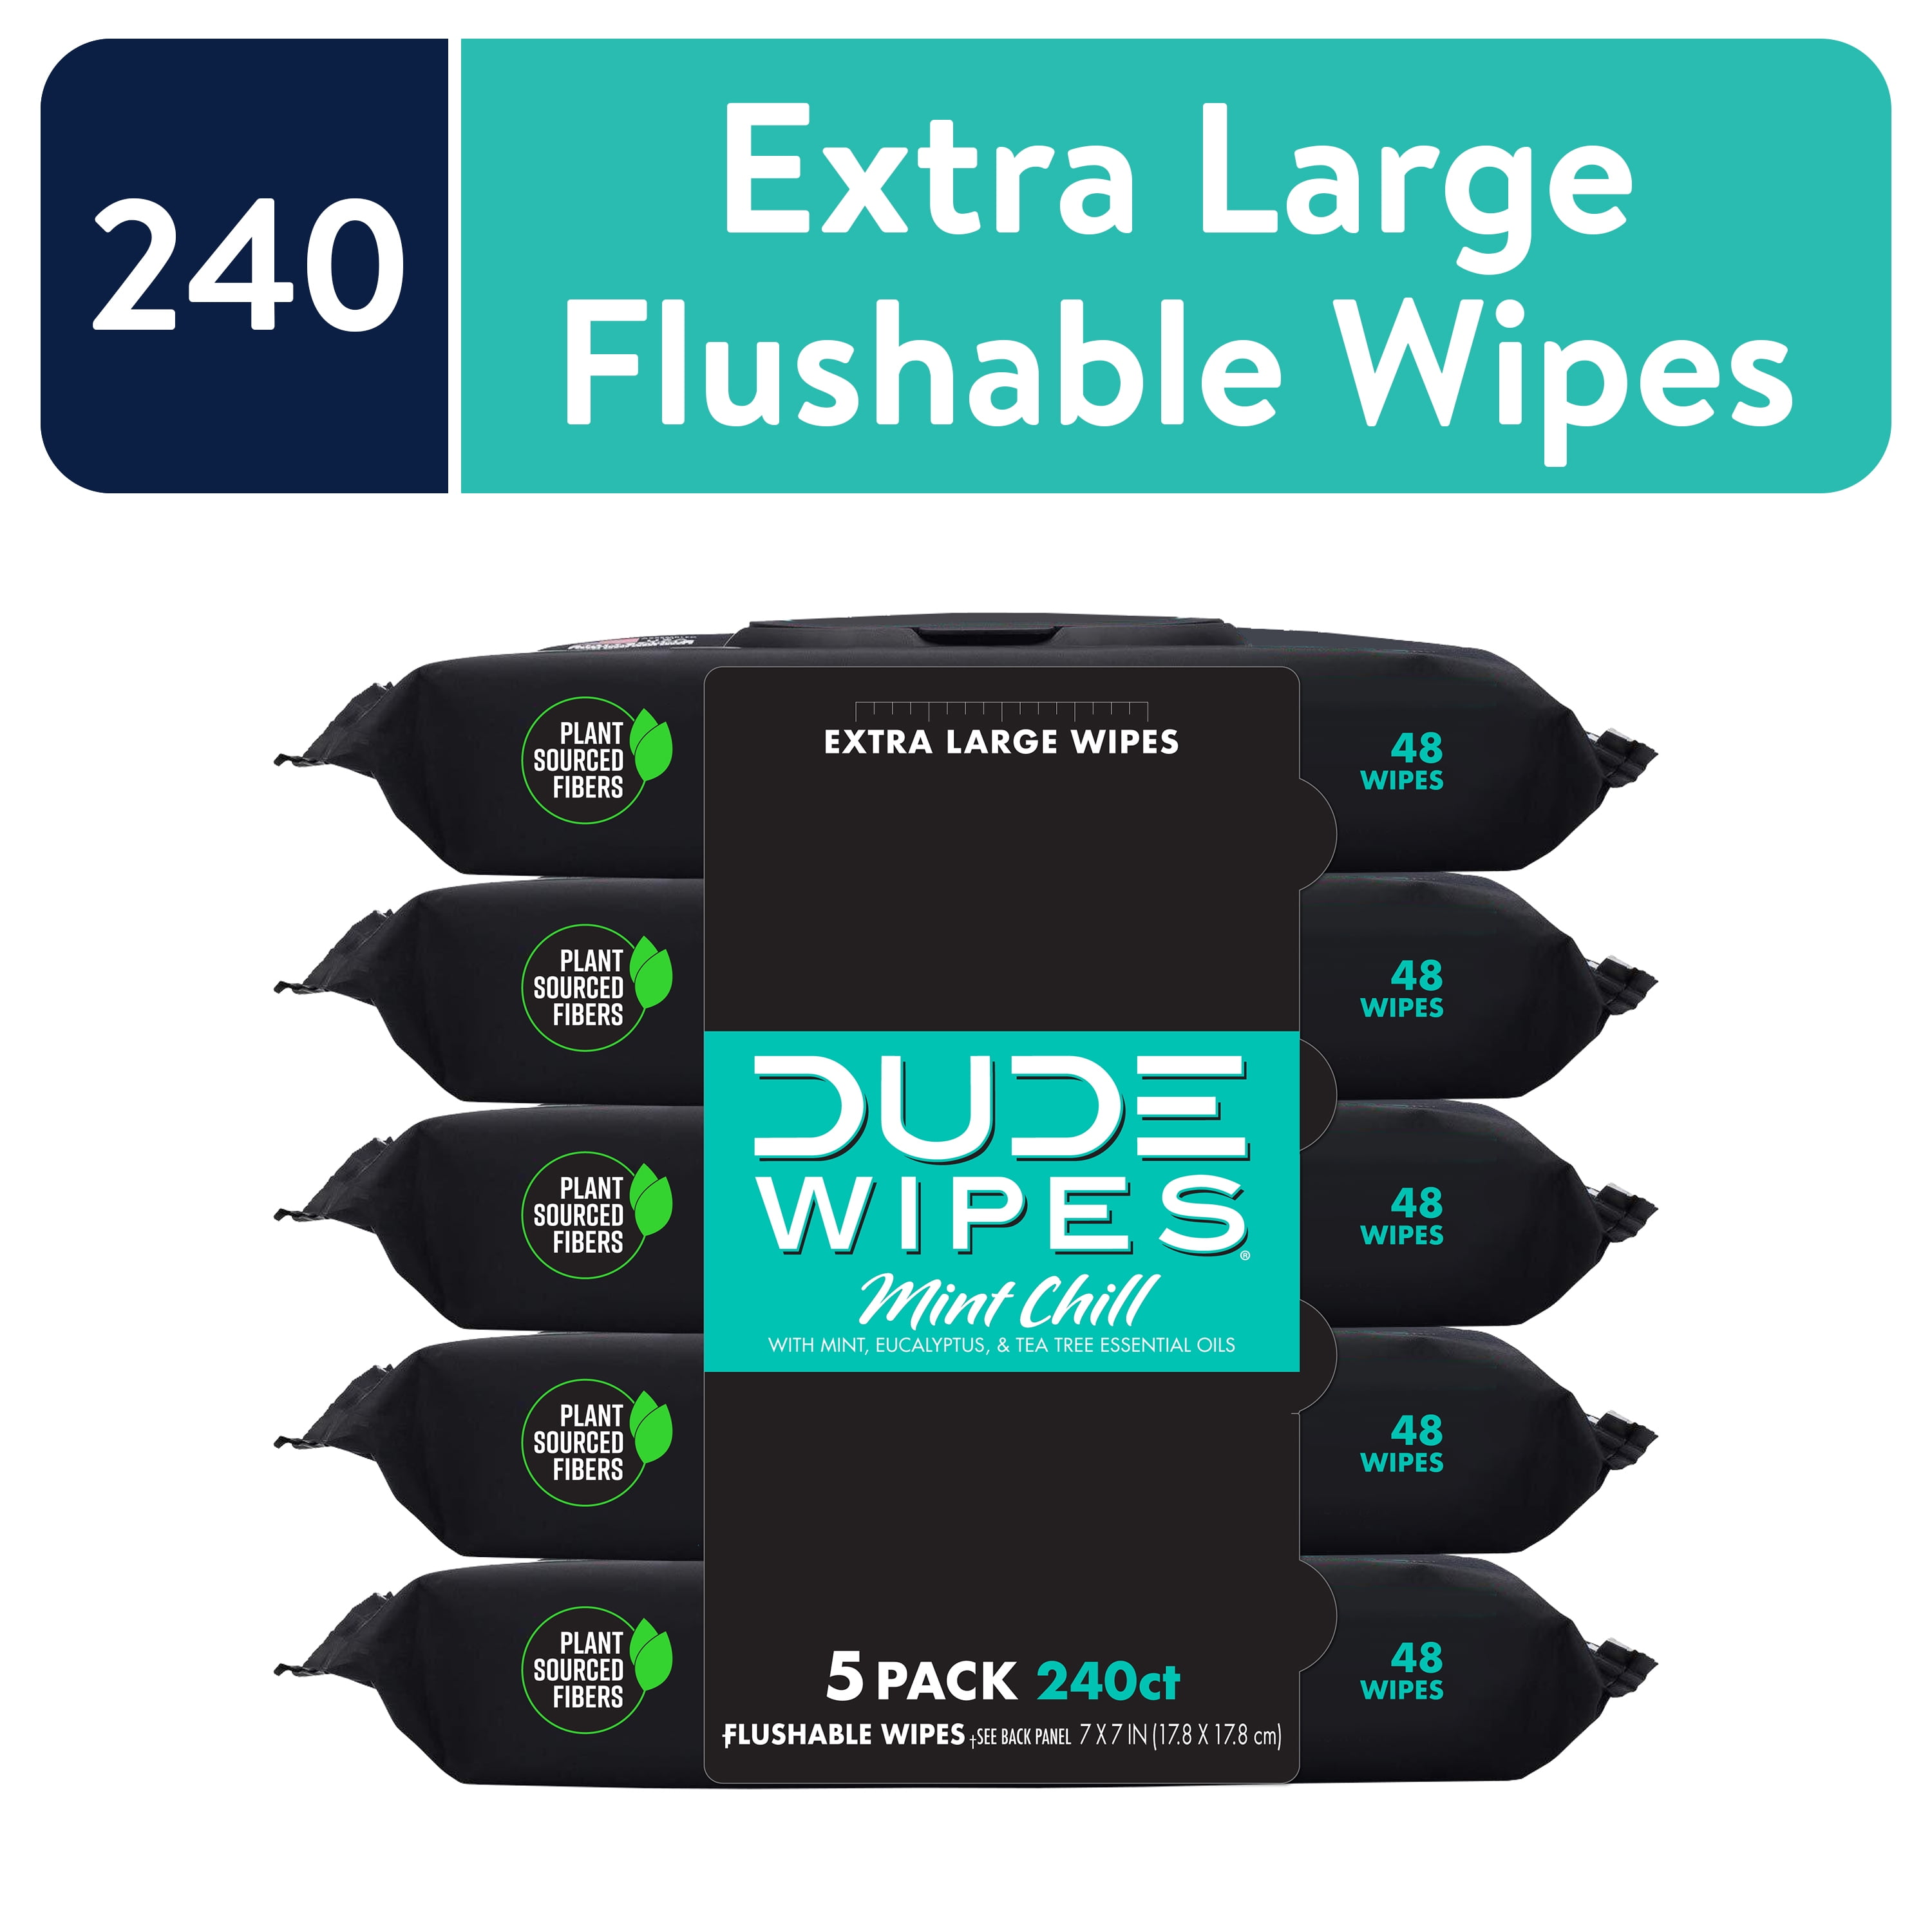 Dude Wipes Unscented XL Flushable Wipes, 6 Flip-Top Packs, 48 Wipes per Pack, 288 Total Wipes